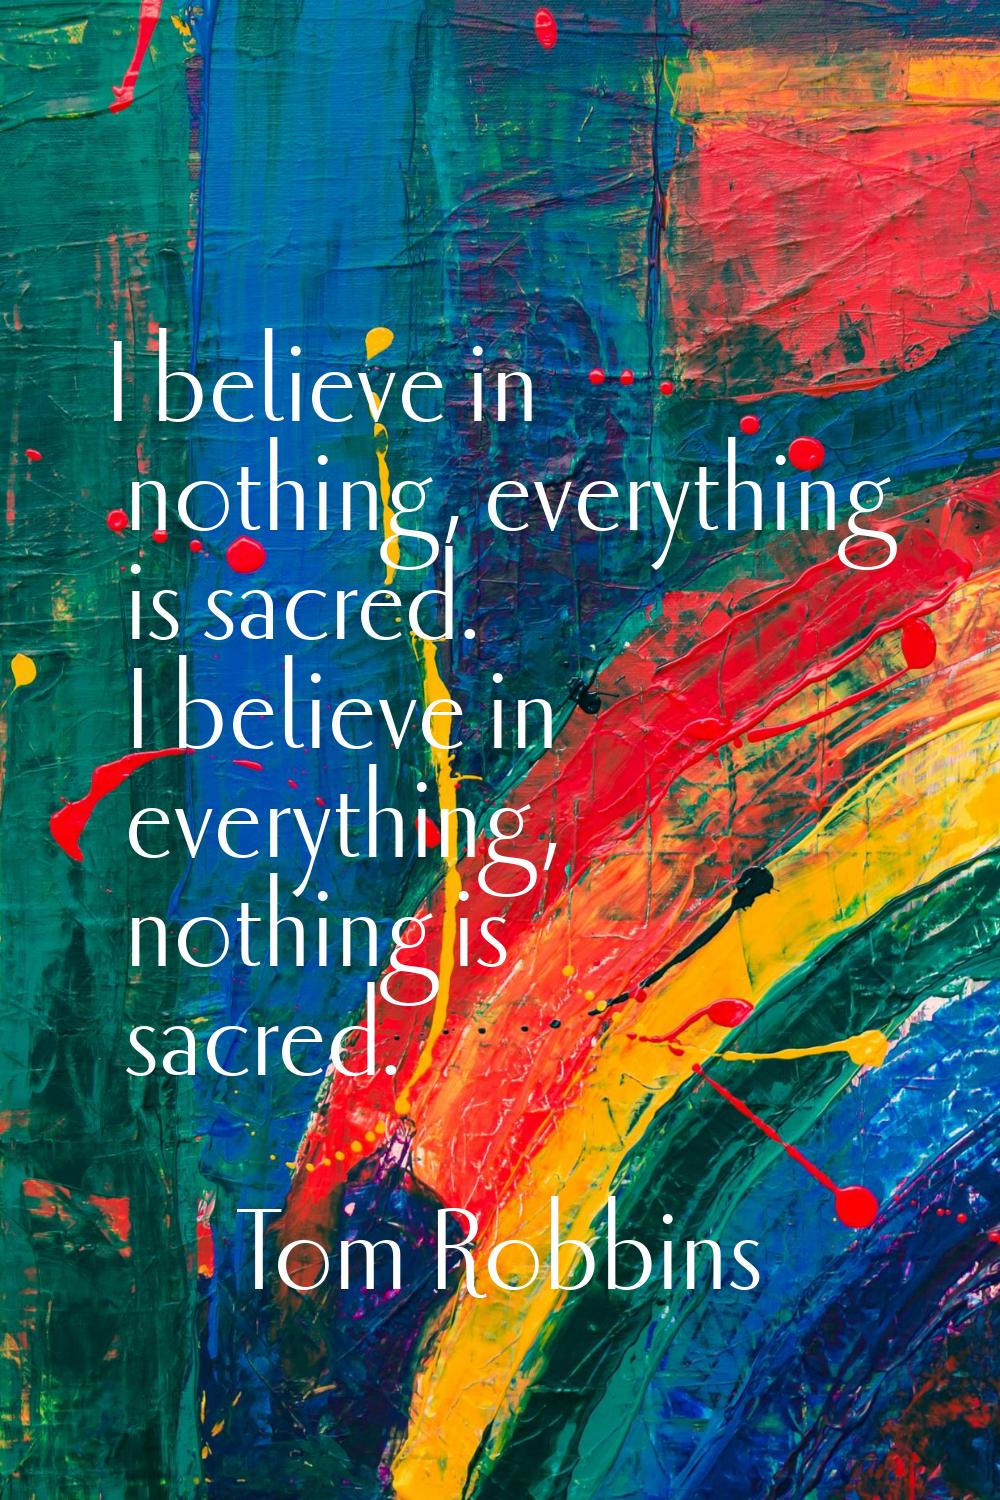 I believe in nothing, everything is sacred. I believe in everything, nothing is sacred.